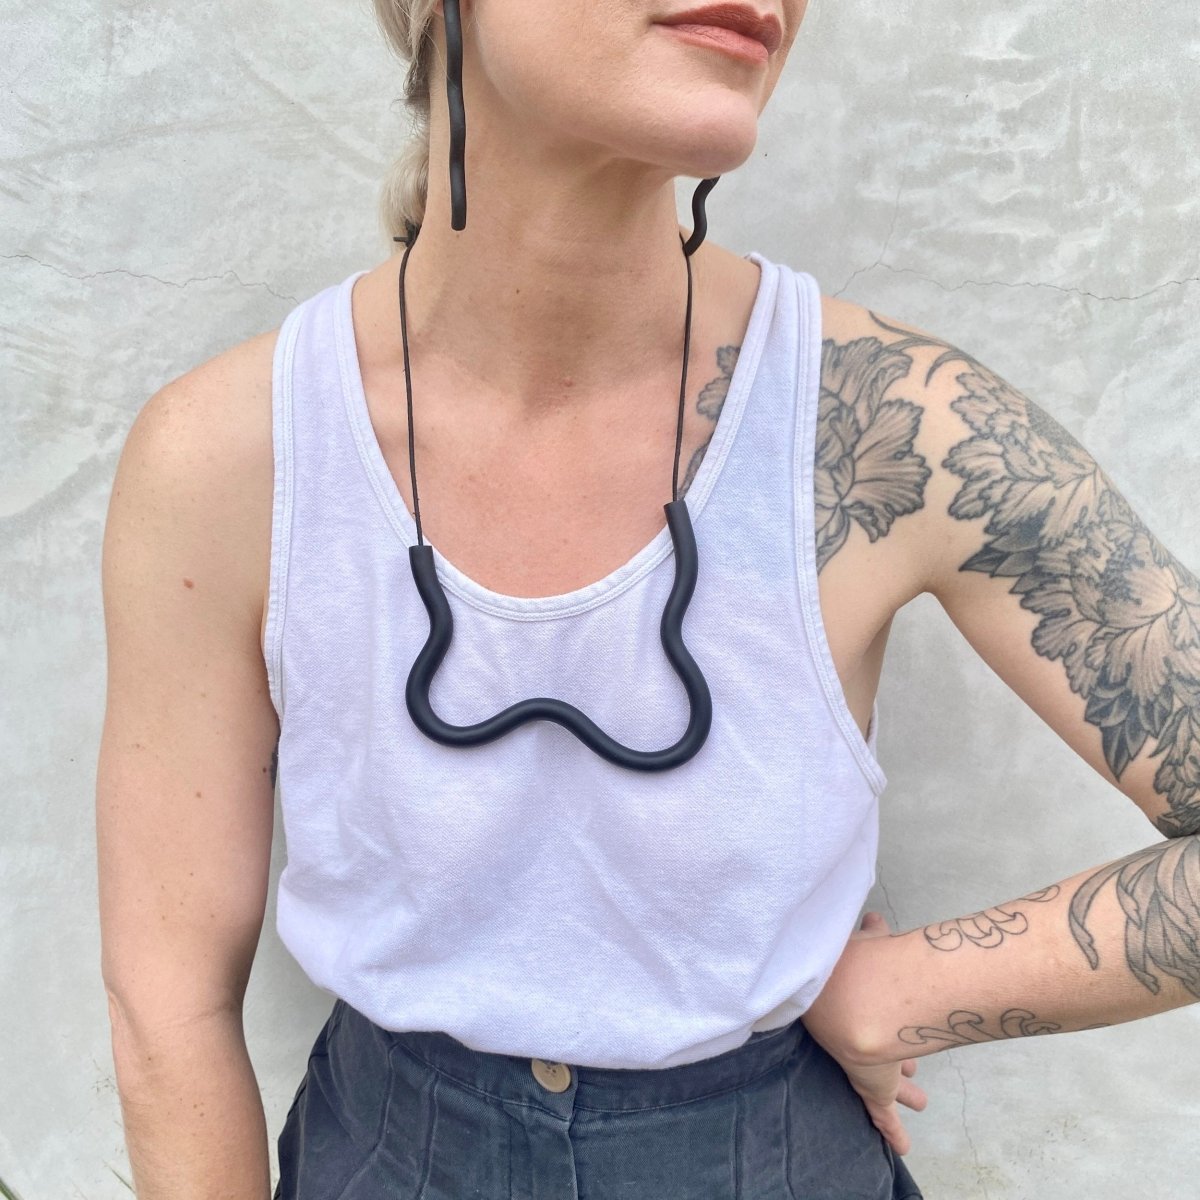 A polymer clay necklace in a wave design with an adjustable leather strap. The Organic Form Necklace in Black is designed and handcrafted by Little Pieces Jewelry in Los Angeles, California.